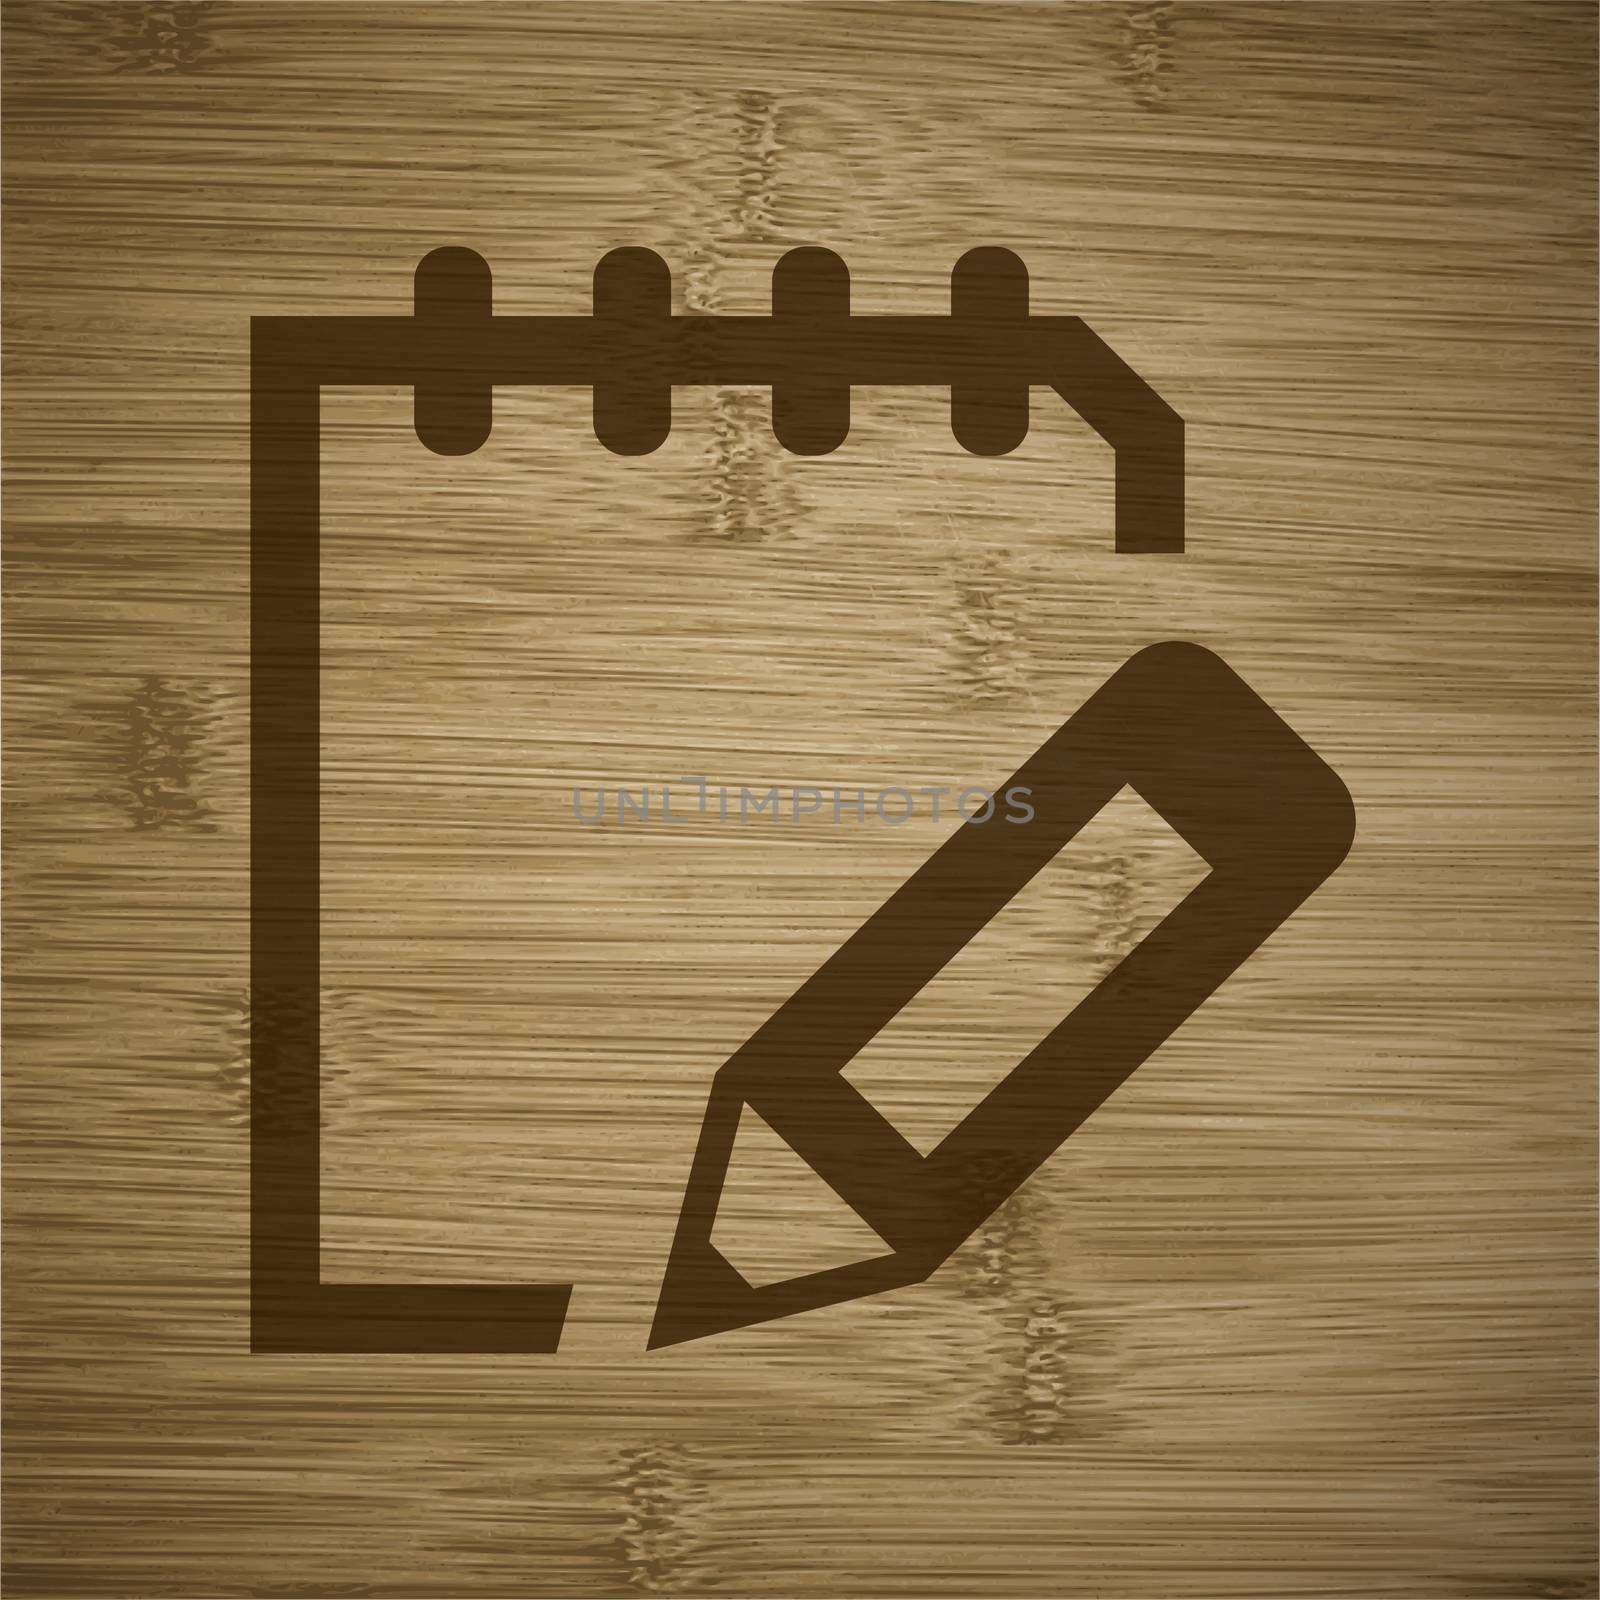 Notepad paper Documents icon flat design with abstract background.